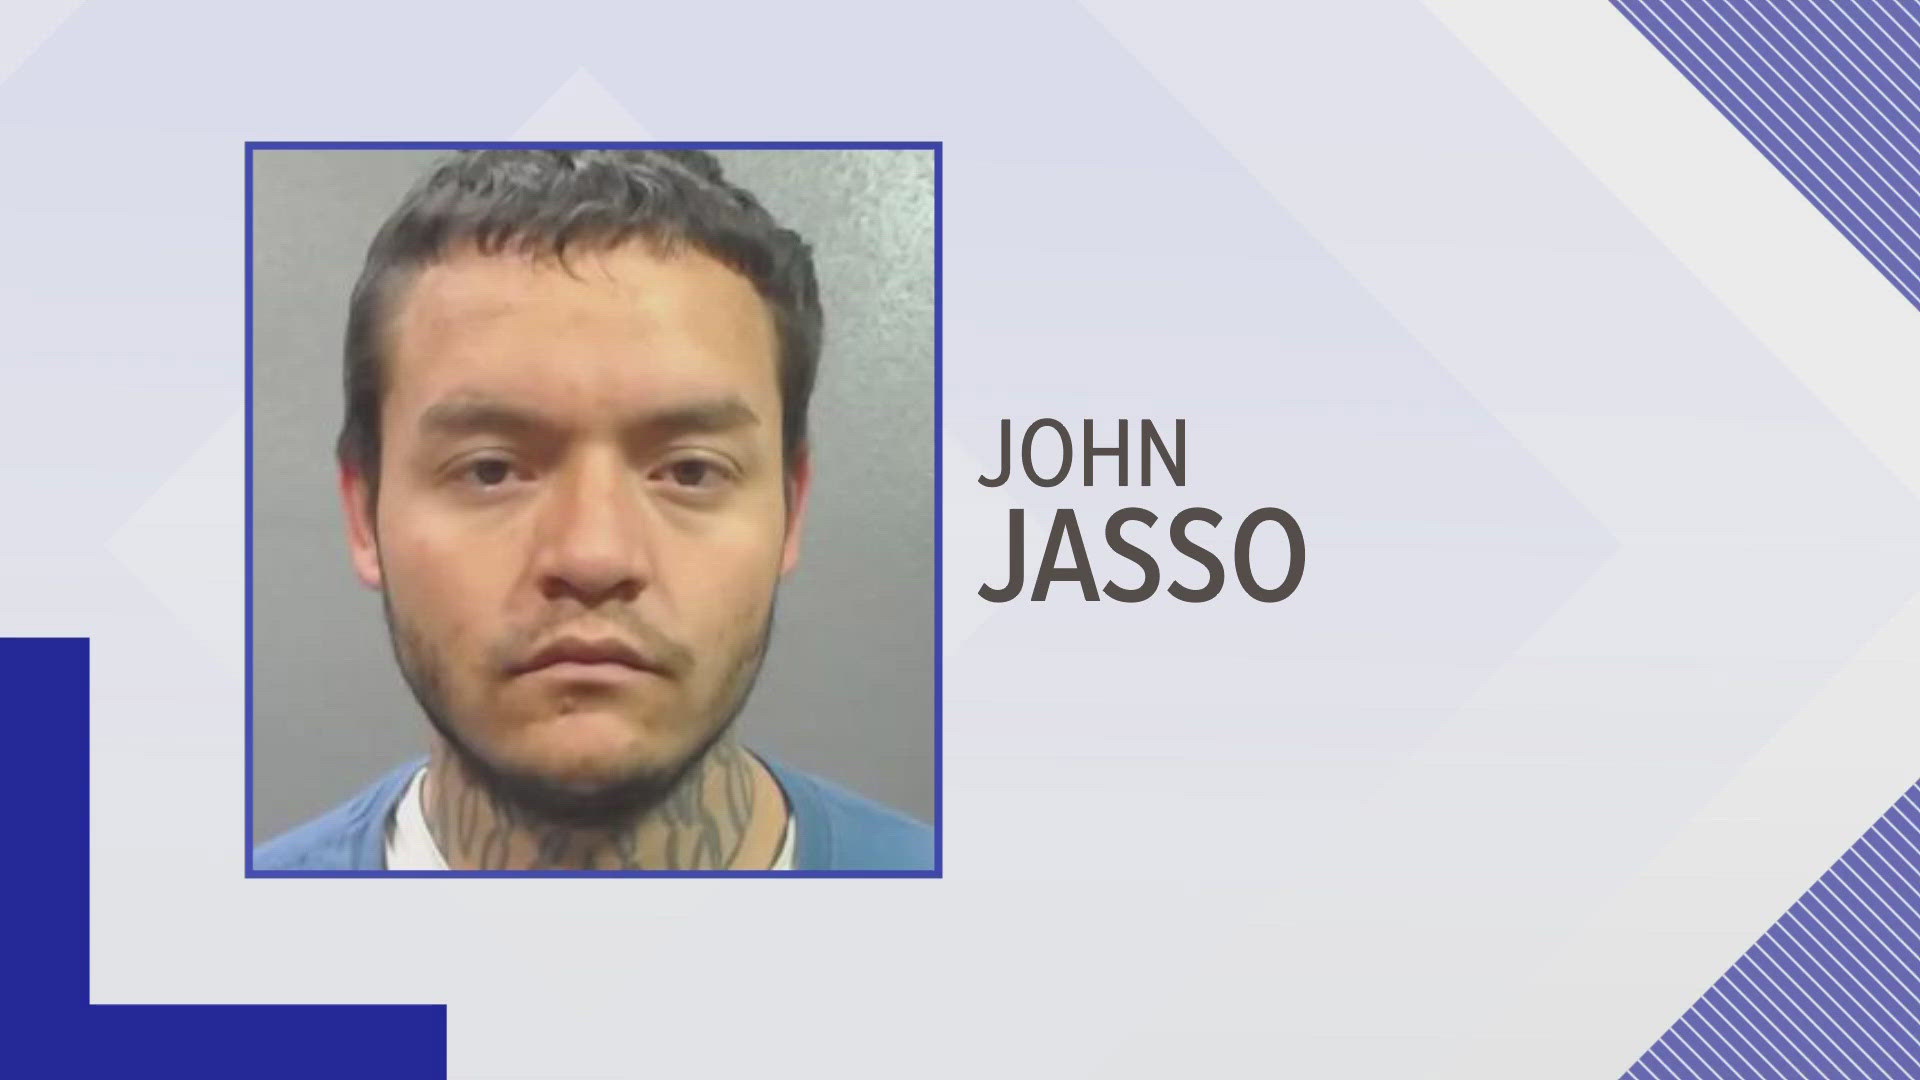 29-year-old John Jasso is wanted on "supervised release violation - felon in possession of a firearm."